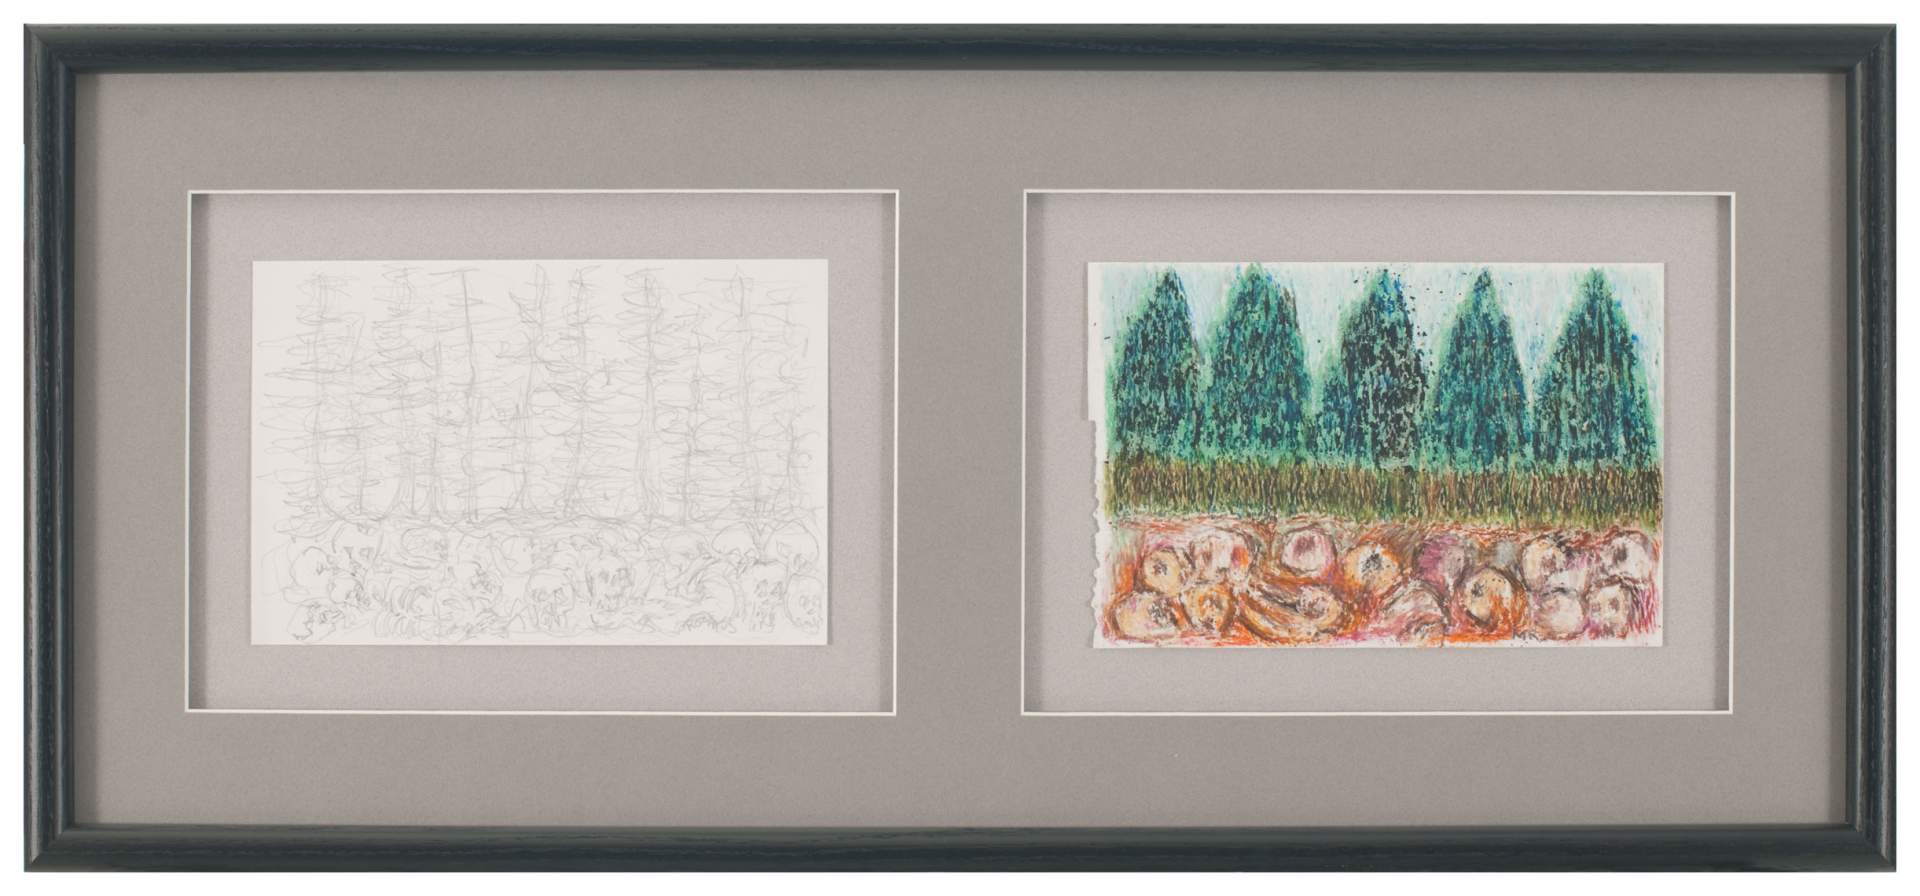 Study for Katyn Forest (left)